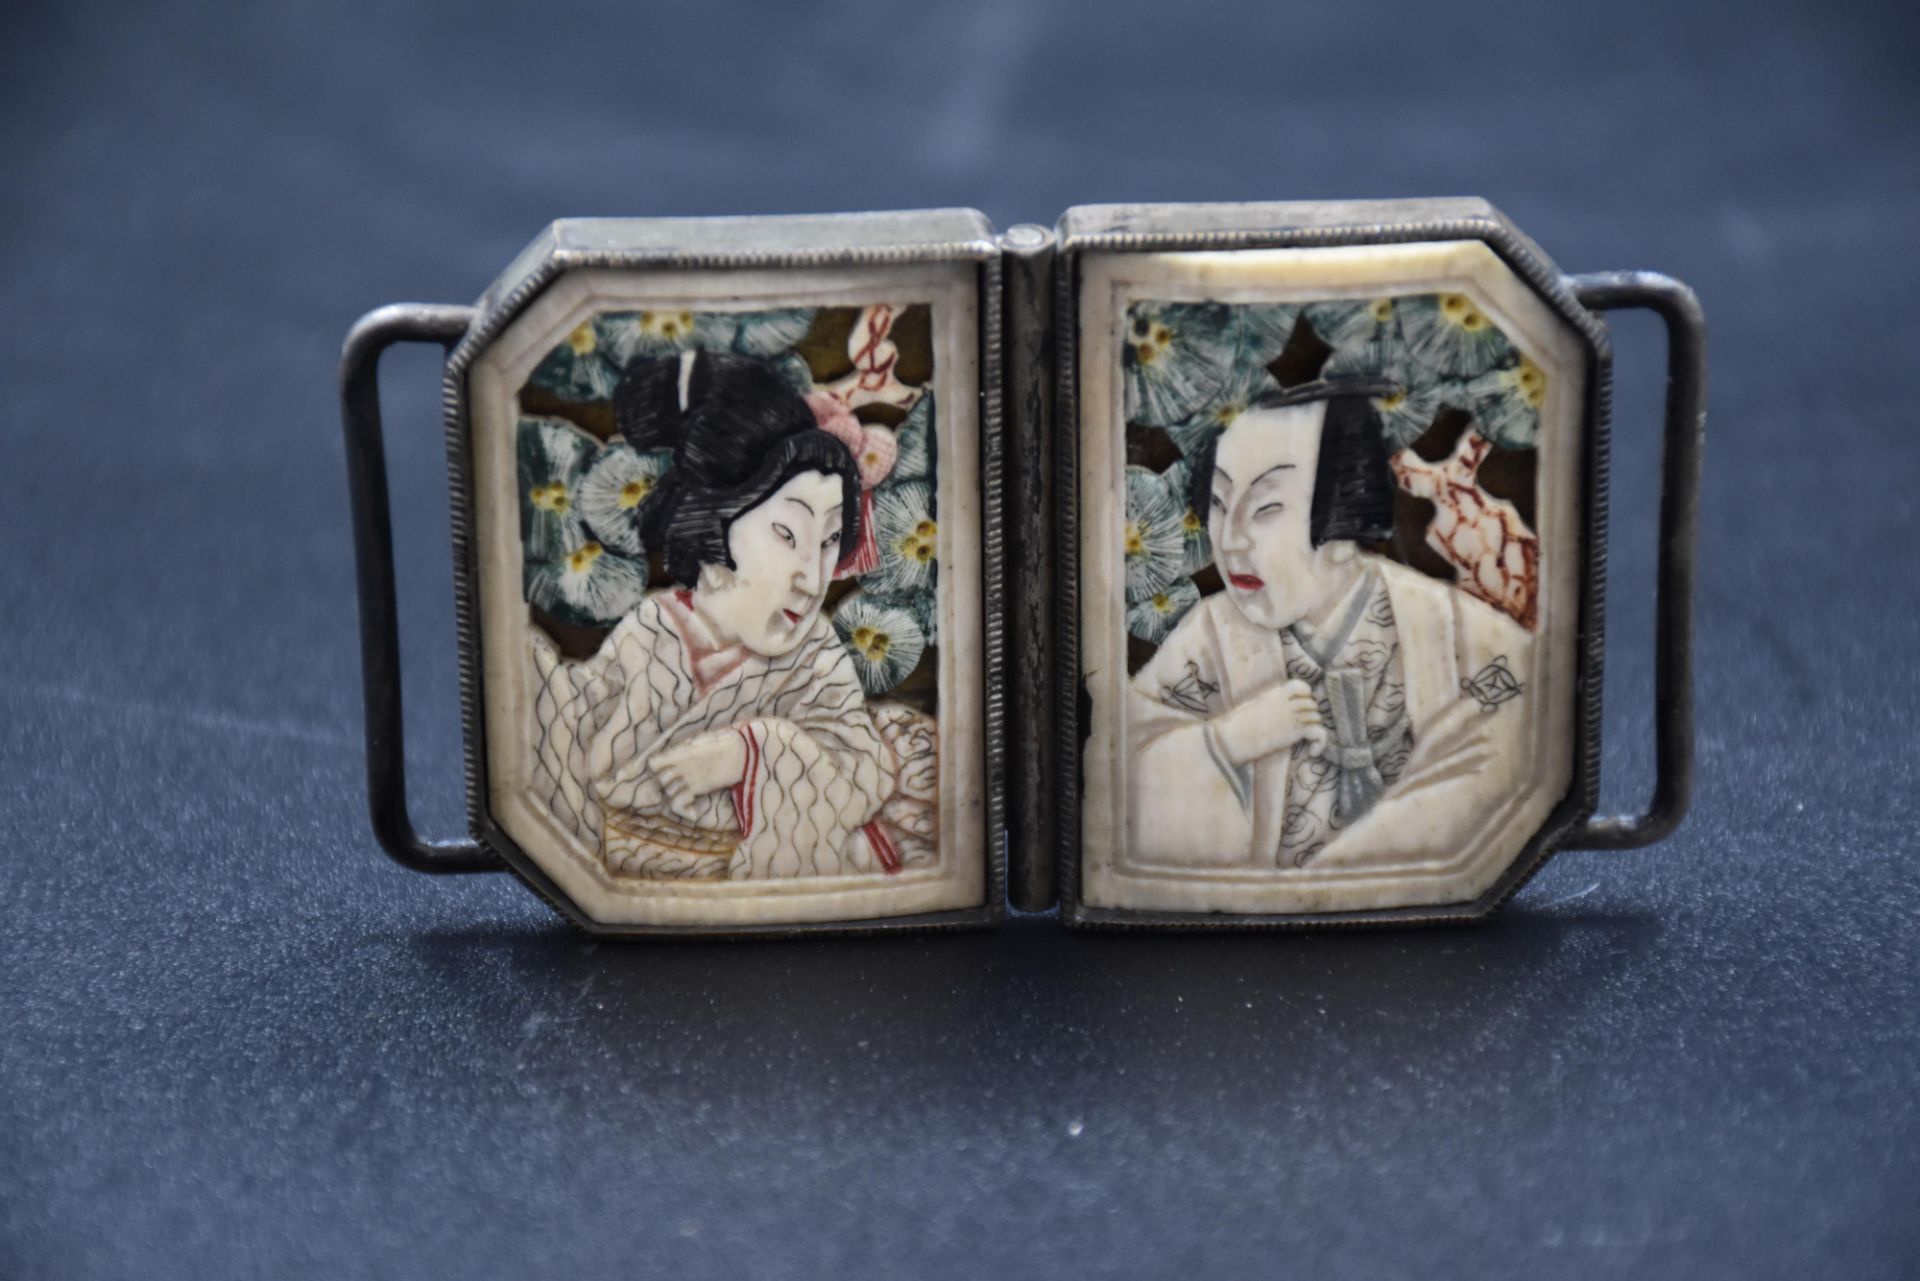 Japan (1920-1930), worked ivory belt buckle with silver plated metal frame, Dimensions : 7,5 x 5 cm - Image 2 of 3